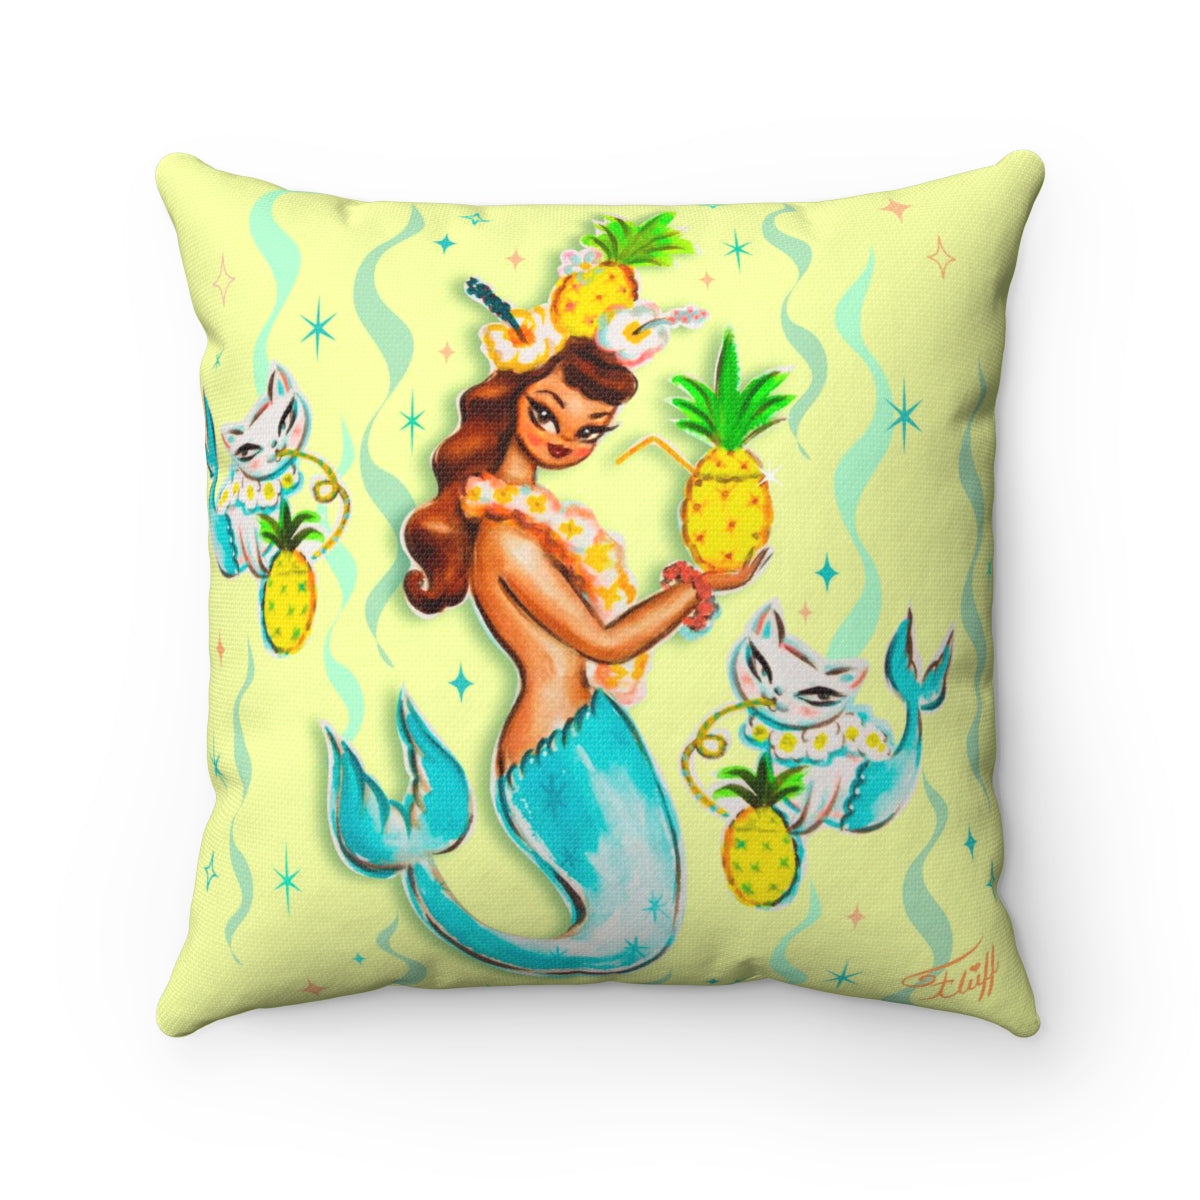 Tropical Pineapple Mermaid with Merkittens • Square Pillow